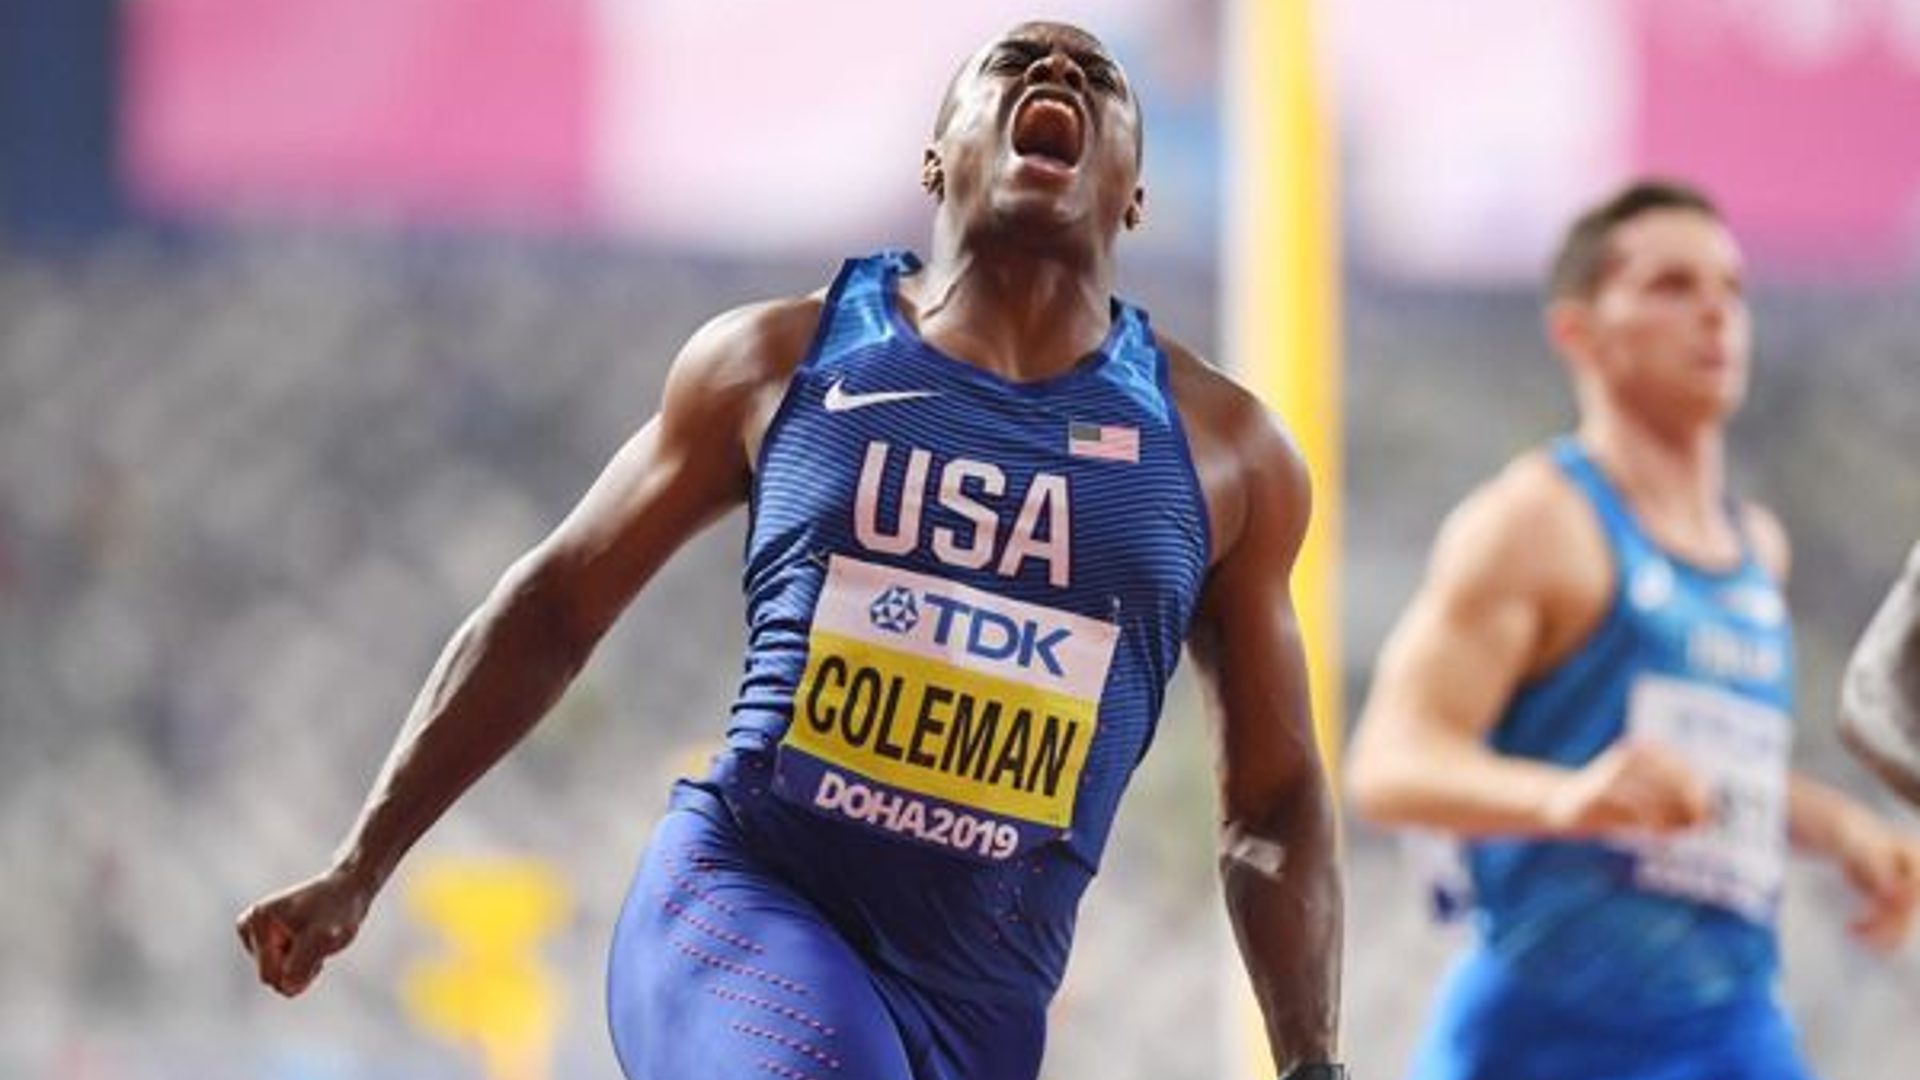 Christian Coleman after becoming the world champion at the World Championships 2019 (Image Credits - World Athletics)